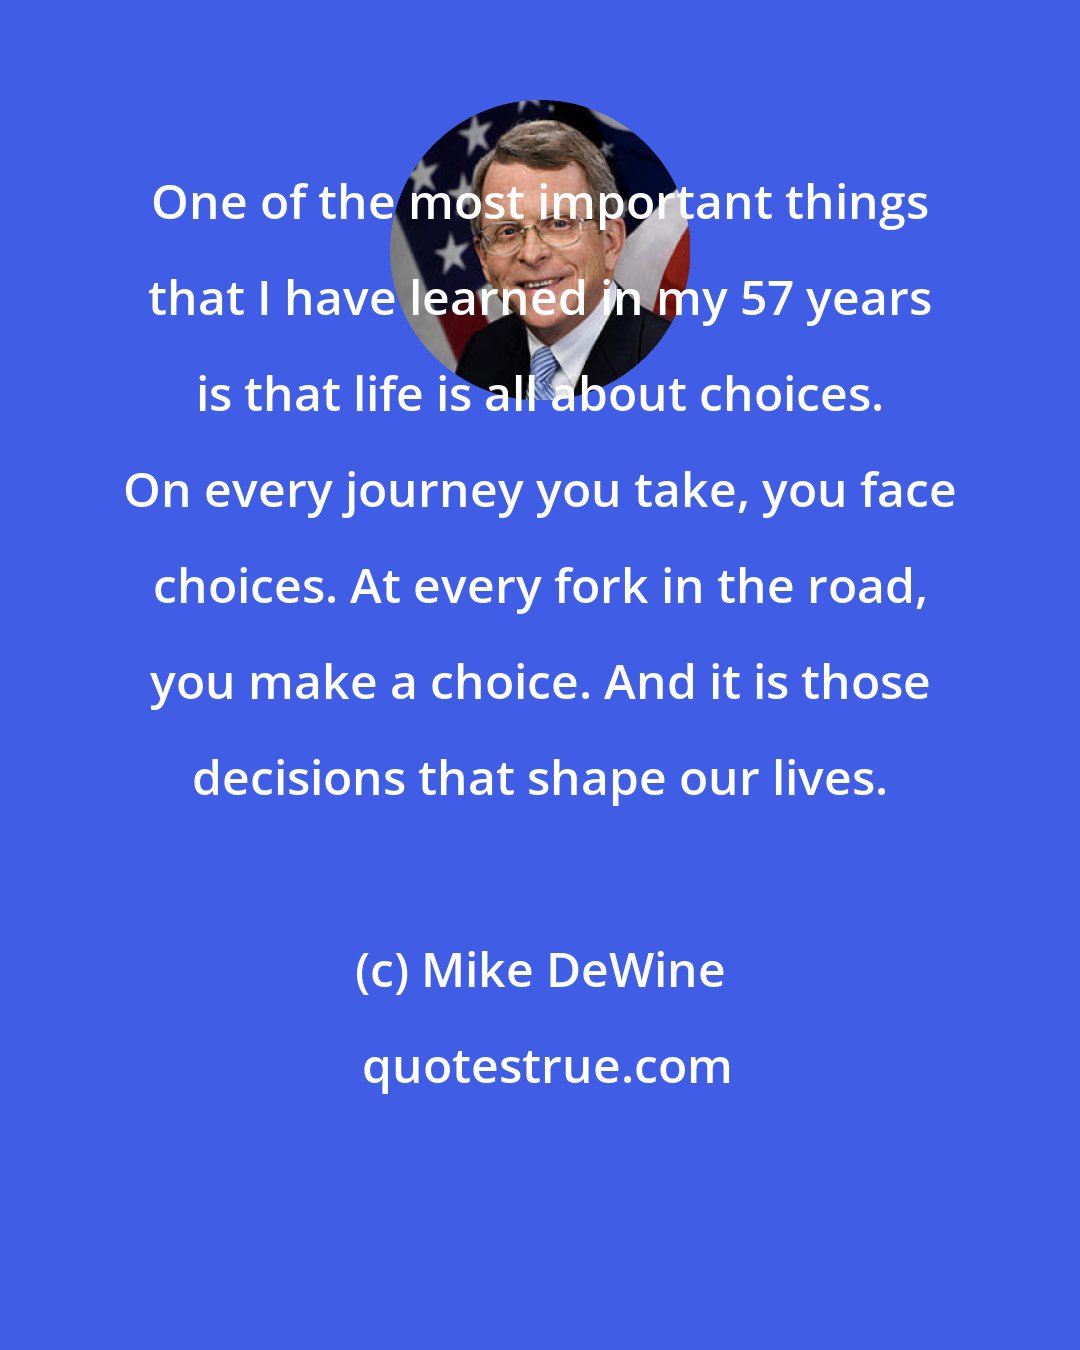 Mike DeWine: One of the most important things that I have learned in my 57 years is that life is all about choices. On every journey you take, you face choices. At every fork in the road, you make a choice. And it is those decisions that shape our lives.